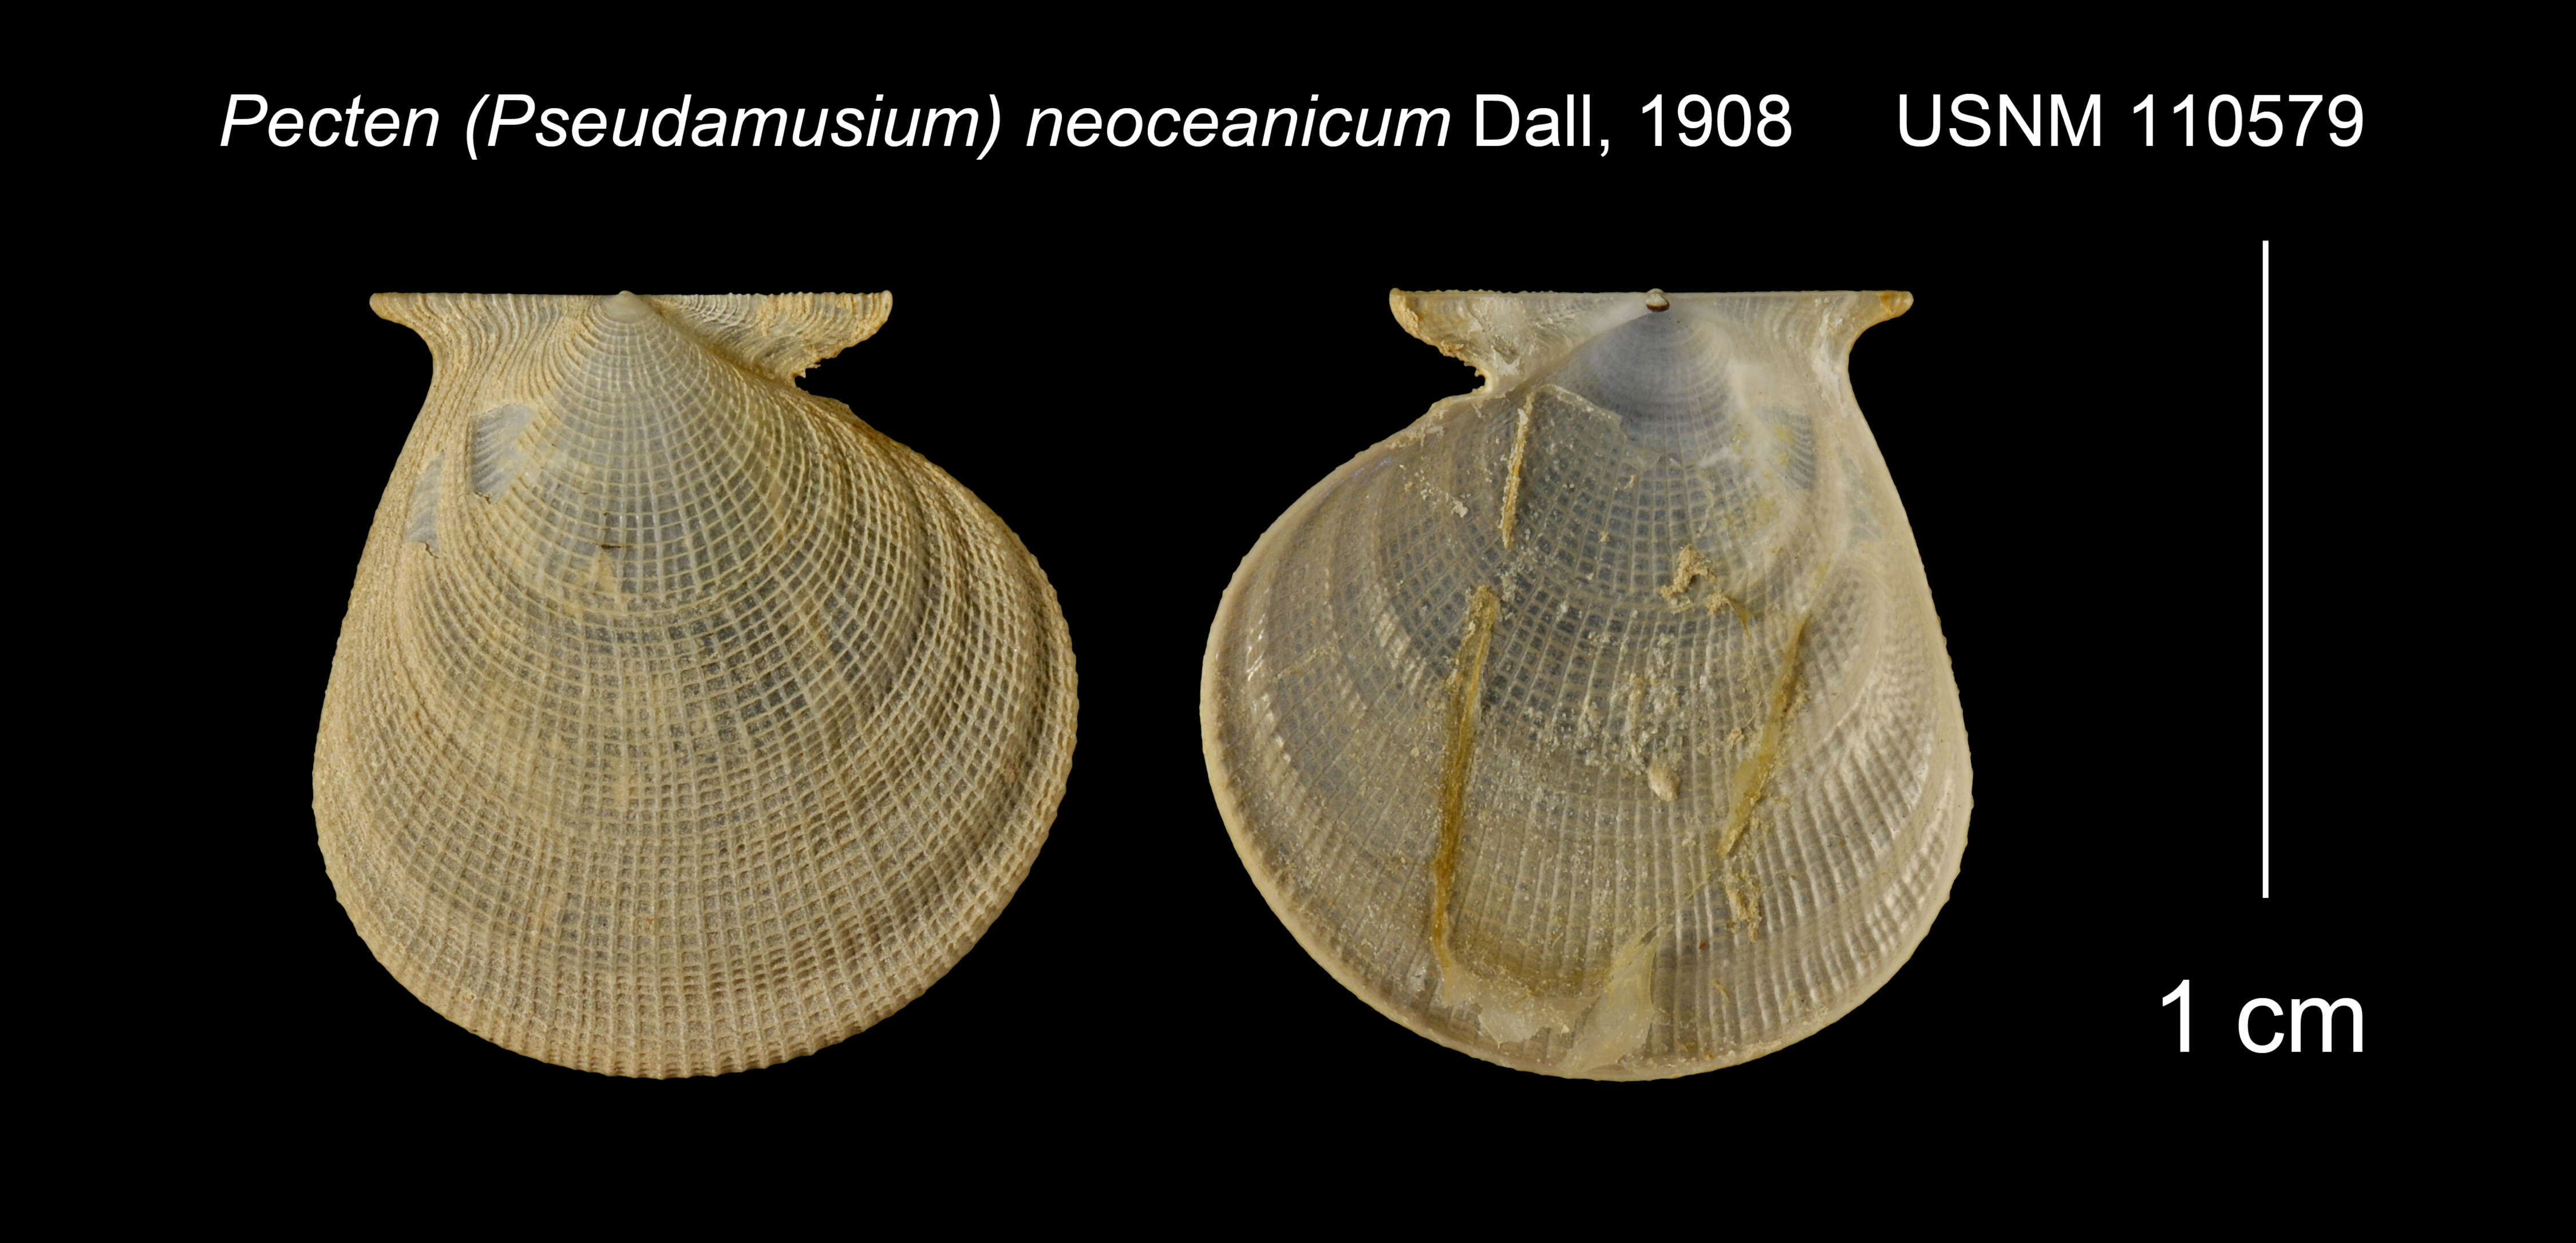 Image of Hyalopecten neoceanicus (Dall 1908)